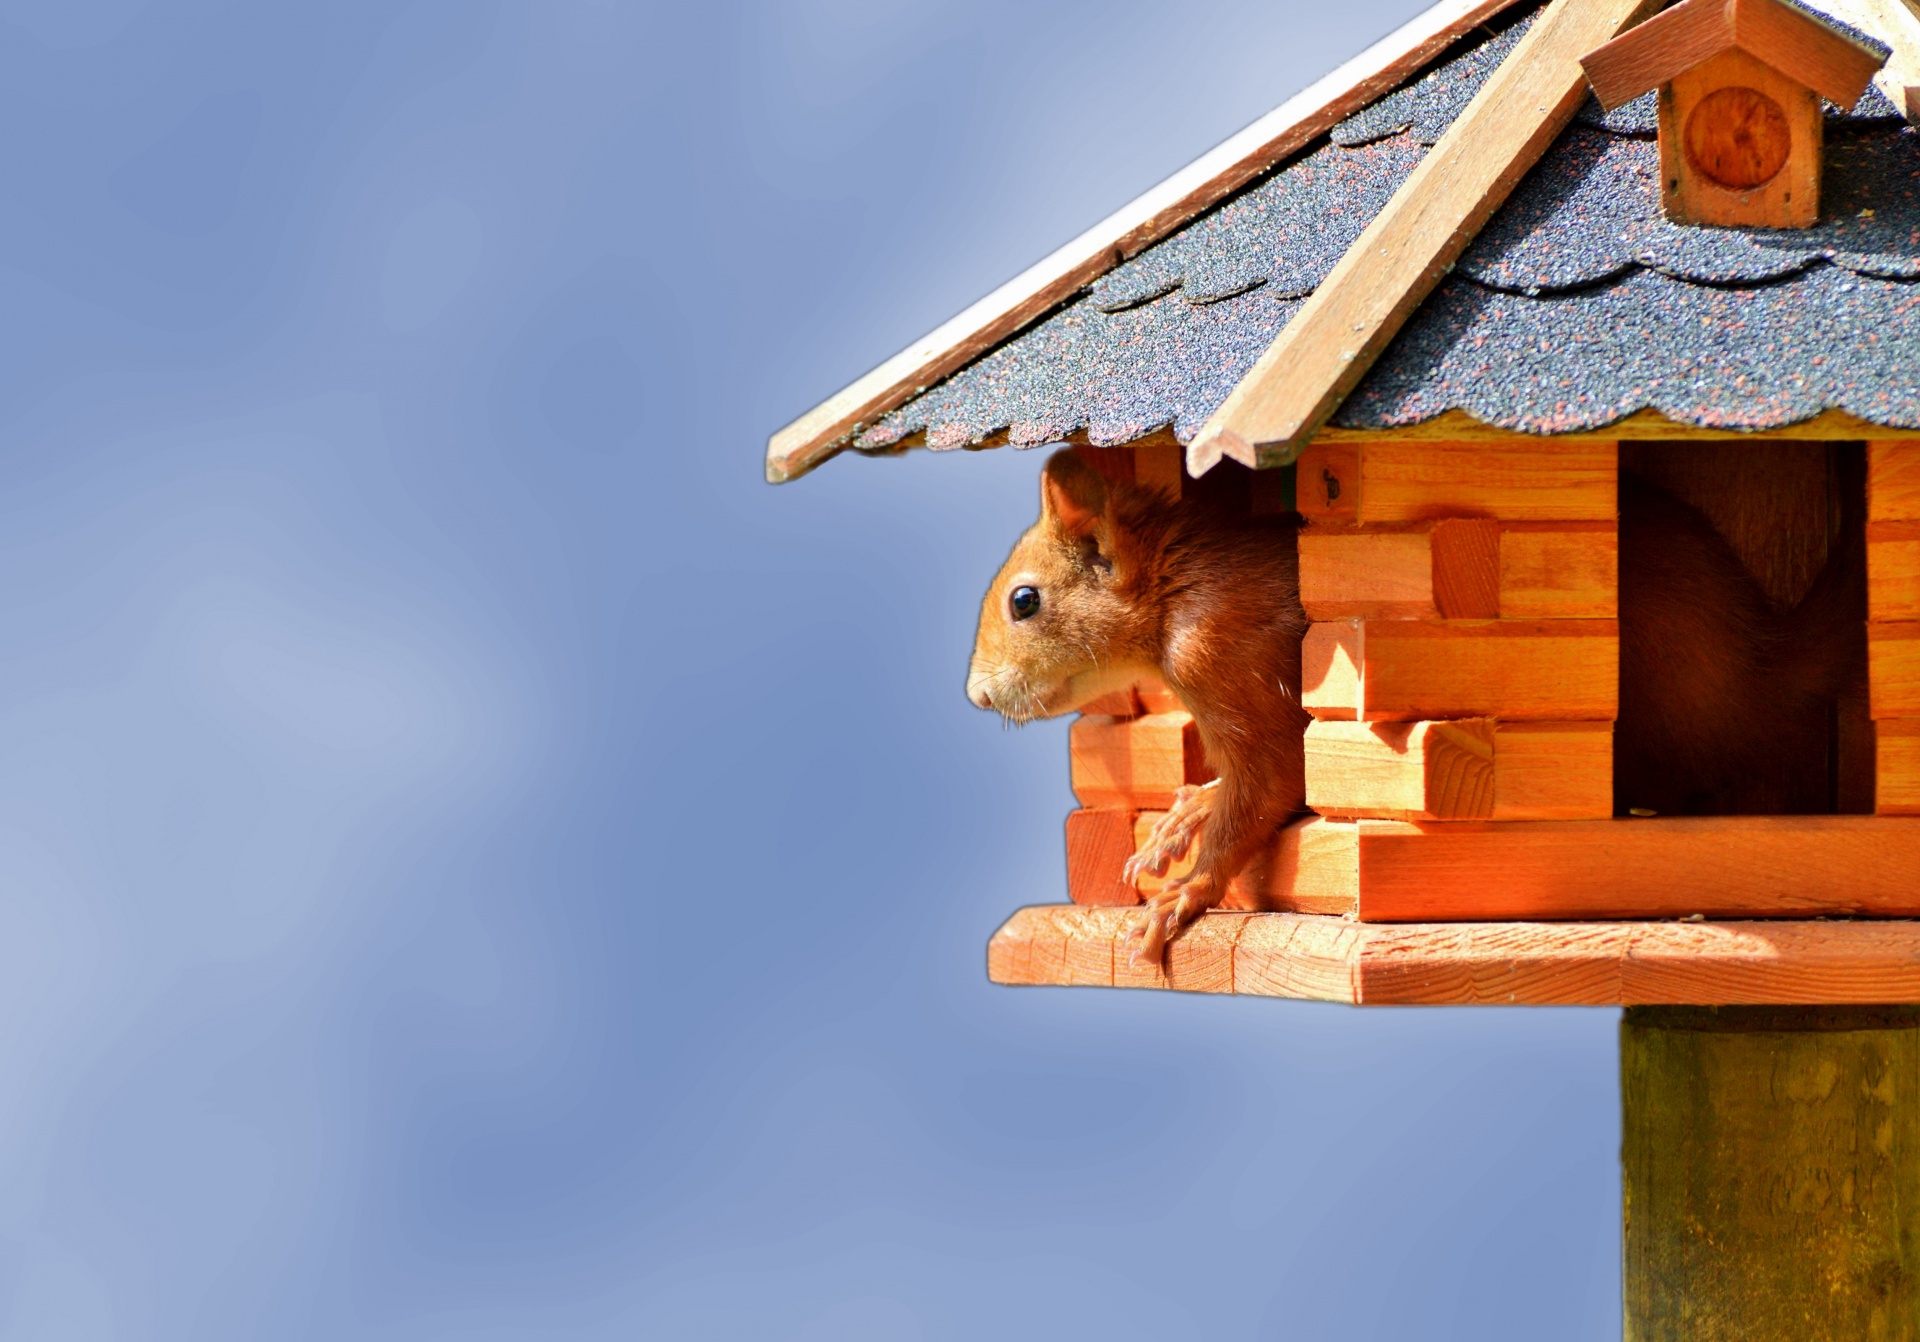 Cute red squirrel in the birdhouse with blue sky background